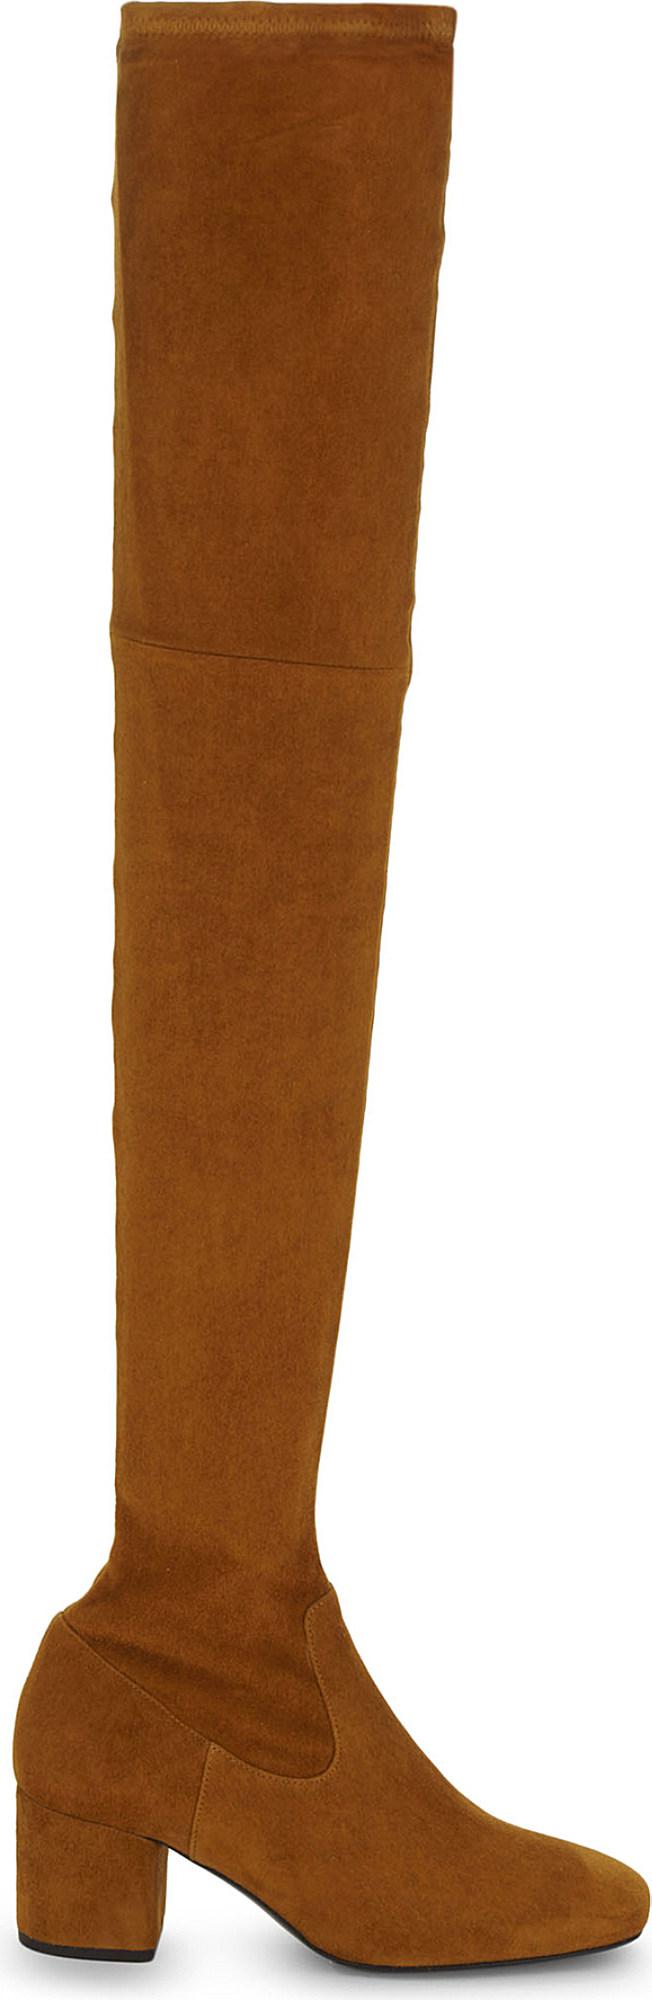 Maje Fuisy Suede Thigh Boots in Brown | Lyst